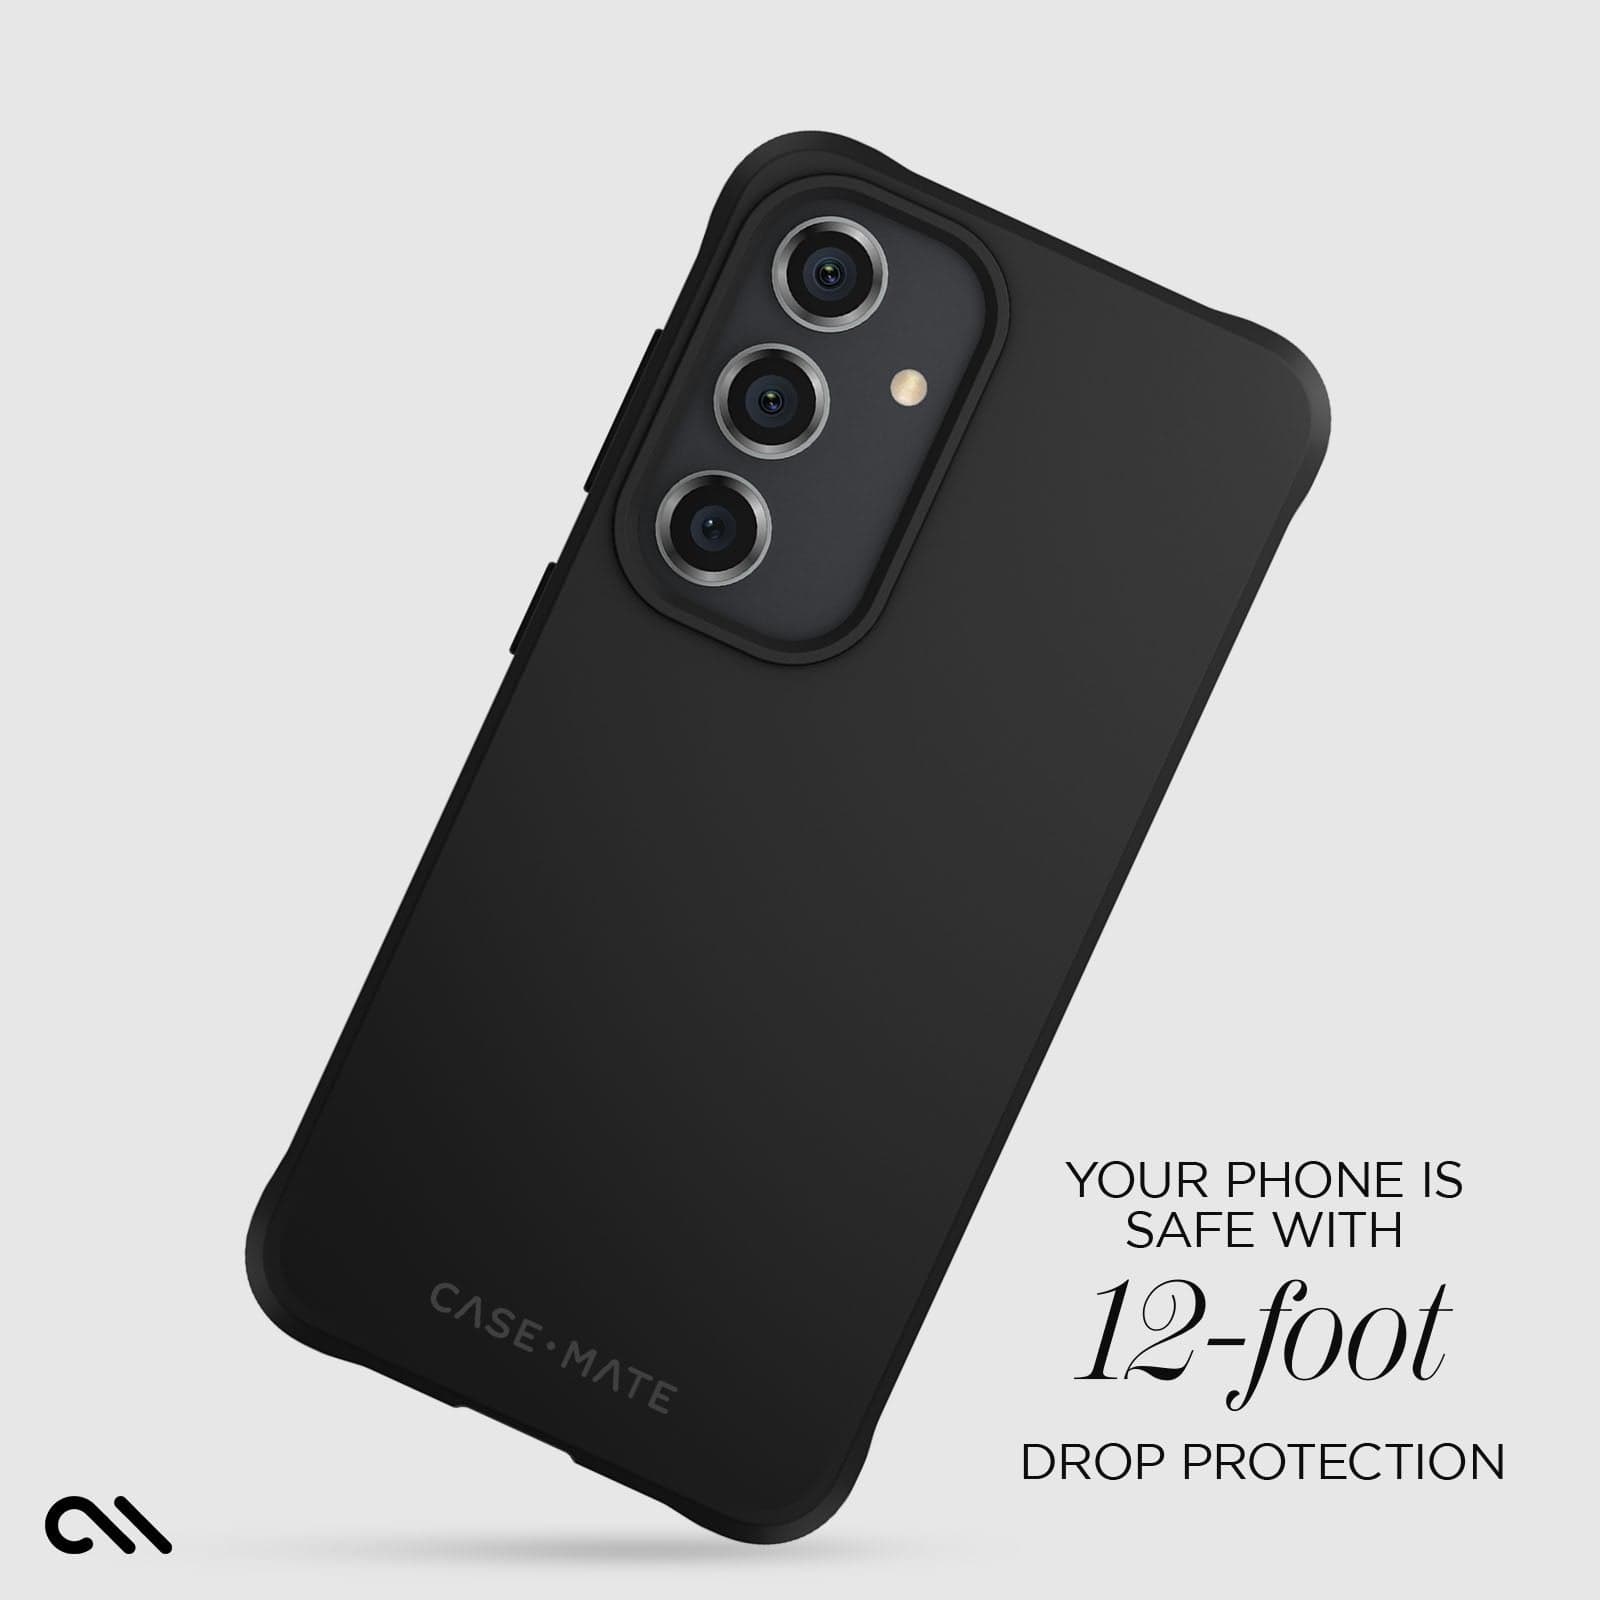 YOUR PHONE IS SAFE WITH 120-FOOT DROP PROTECTION